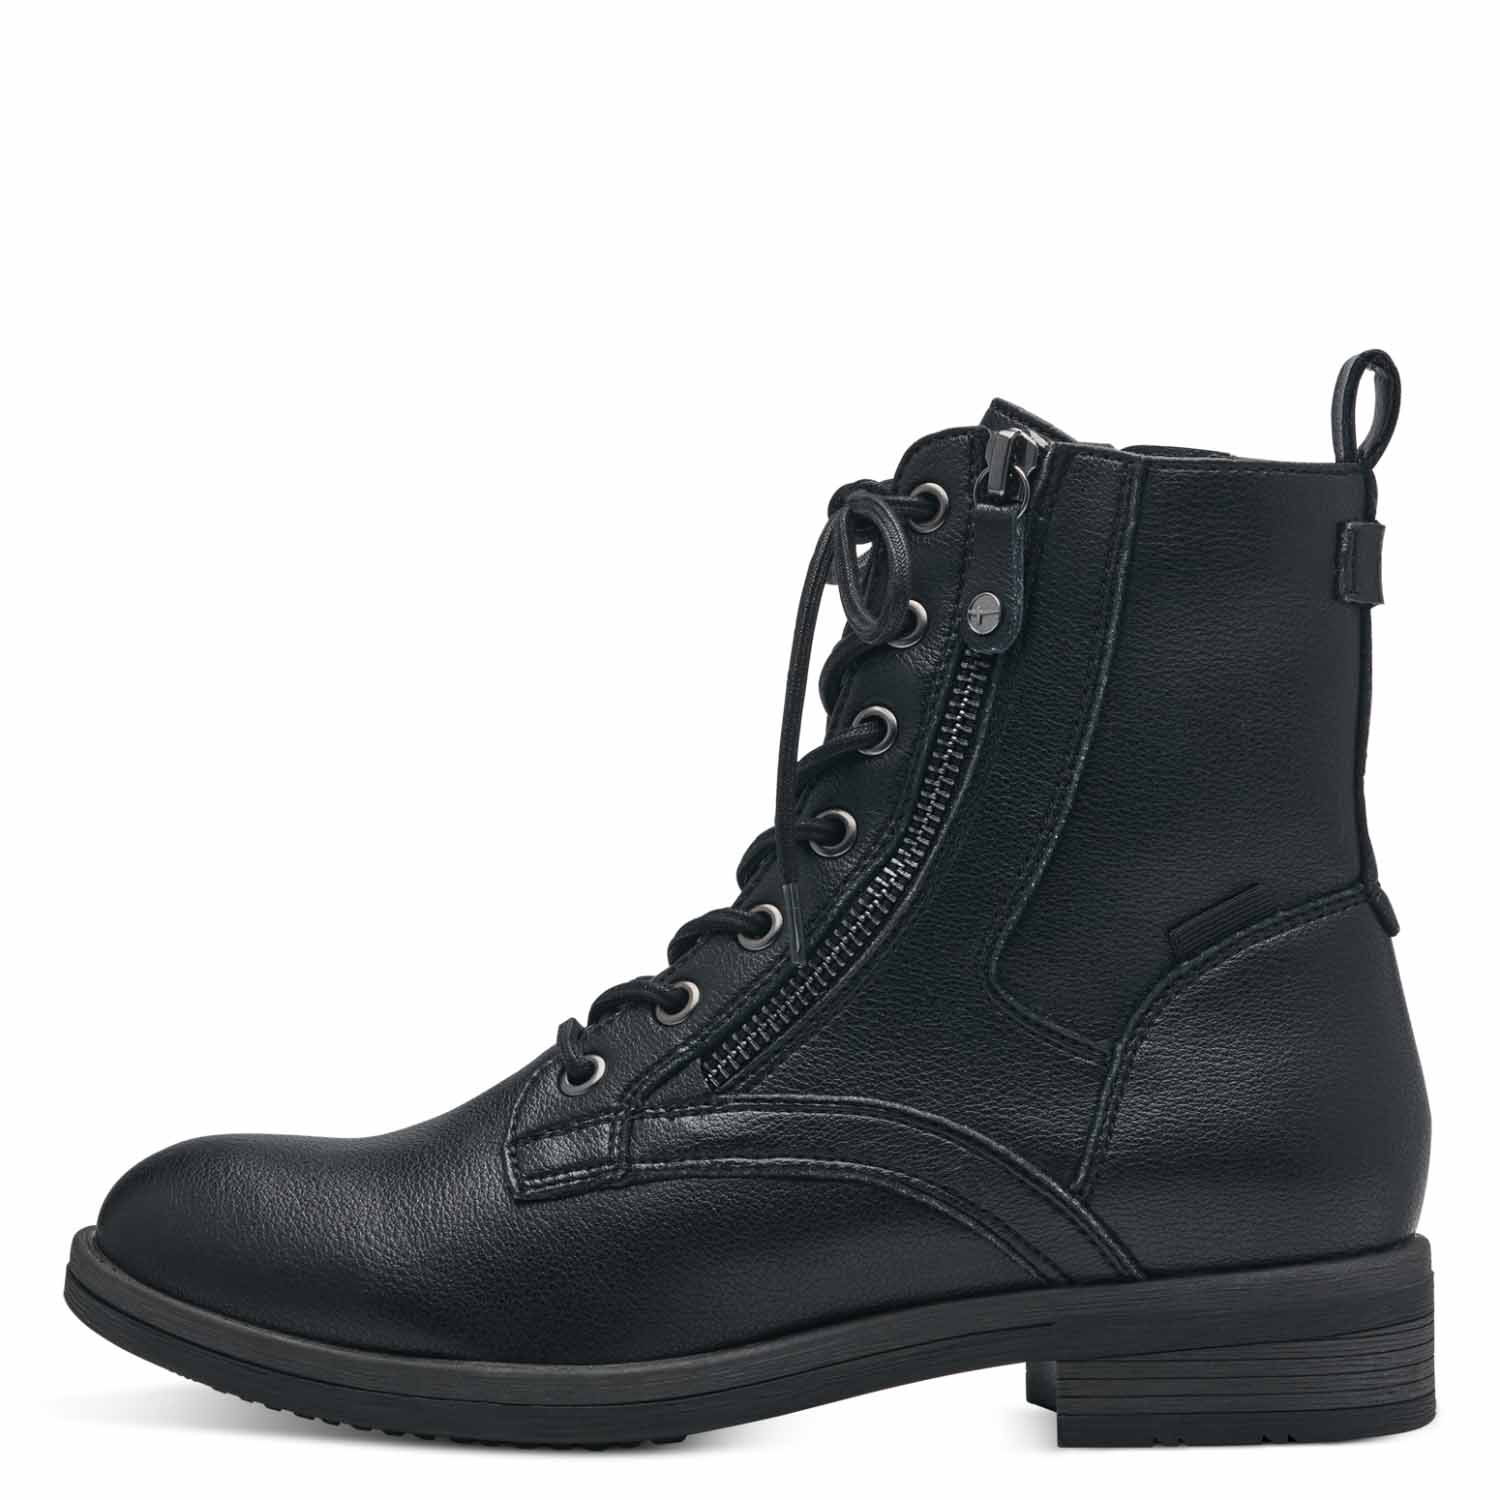 Front view of the black boot with laces and zipper.